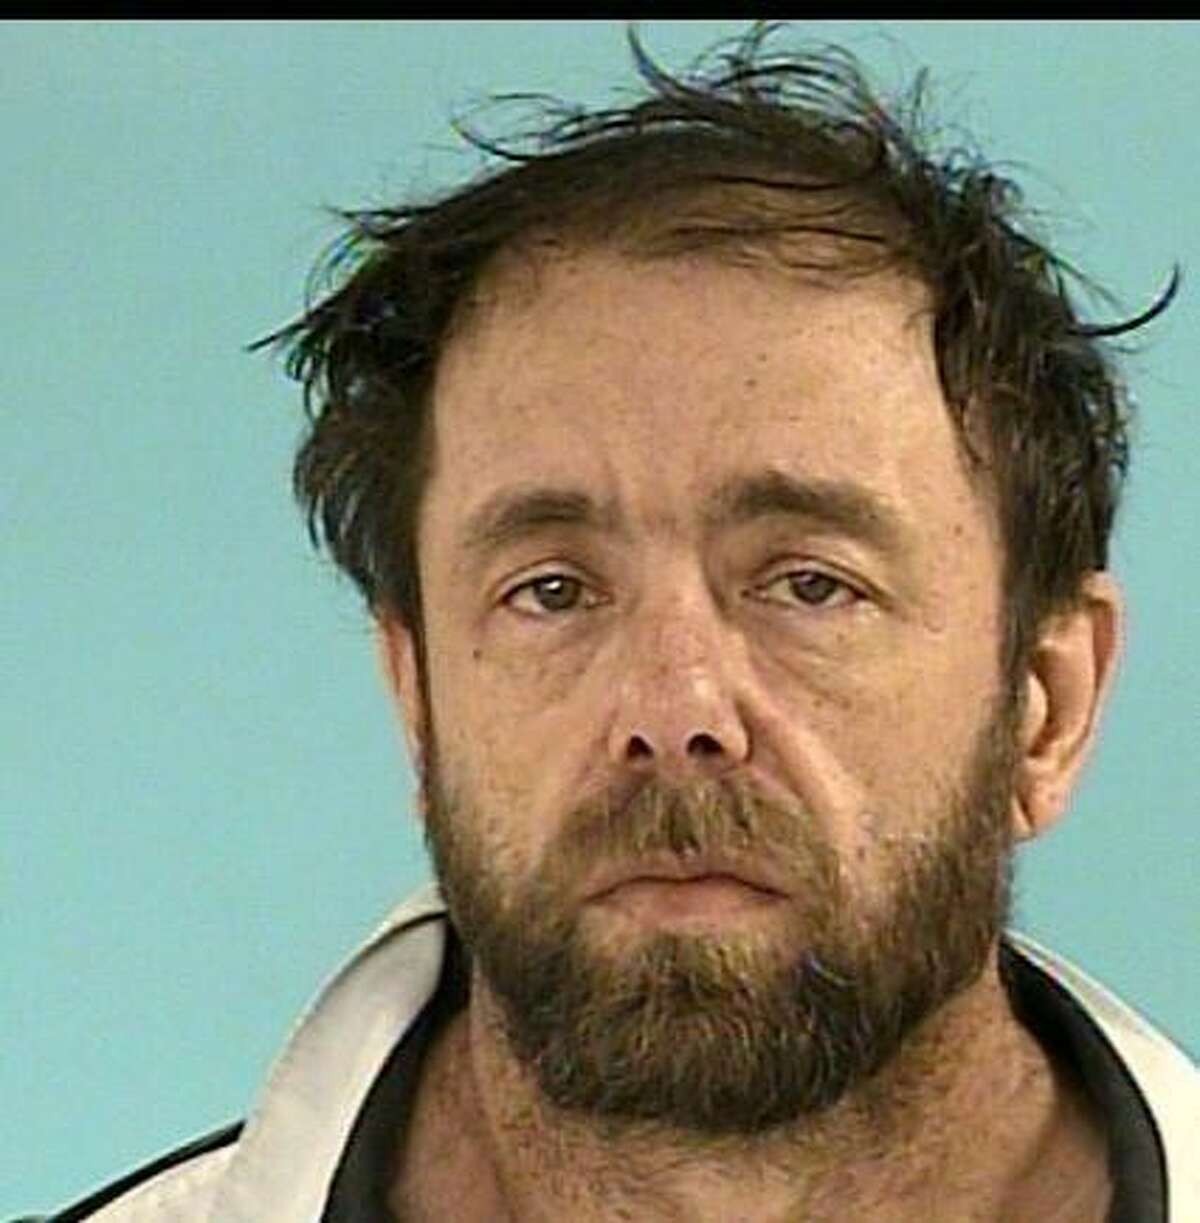 BOYD, George NeilWhite/Male DOB: 04/17/1967Height: 6’00” Weight: 165 lbs.Hair: Brown Eyes: HazelWarrant: # 120404265 Surety to SurrenderPossession of a Controlled SubstanceLKA: Frances, Magnolia.